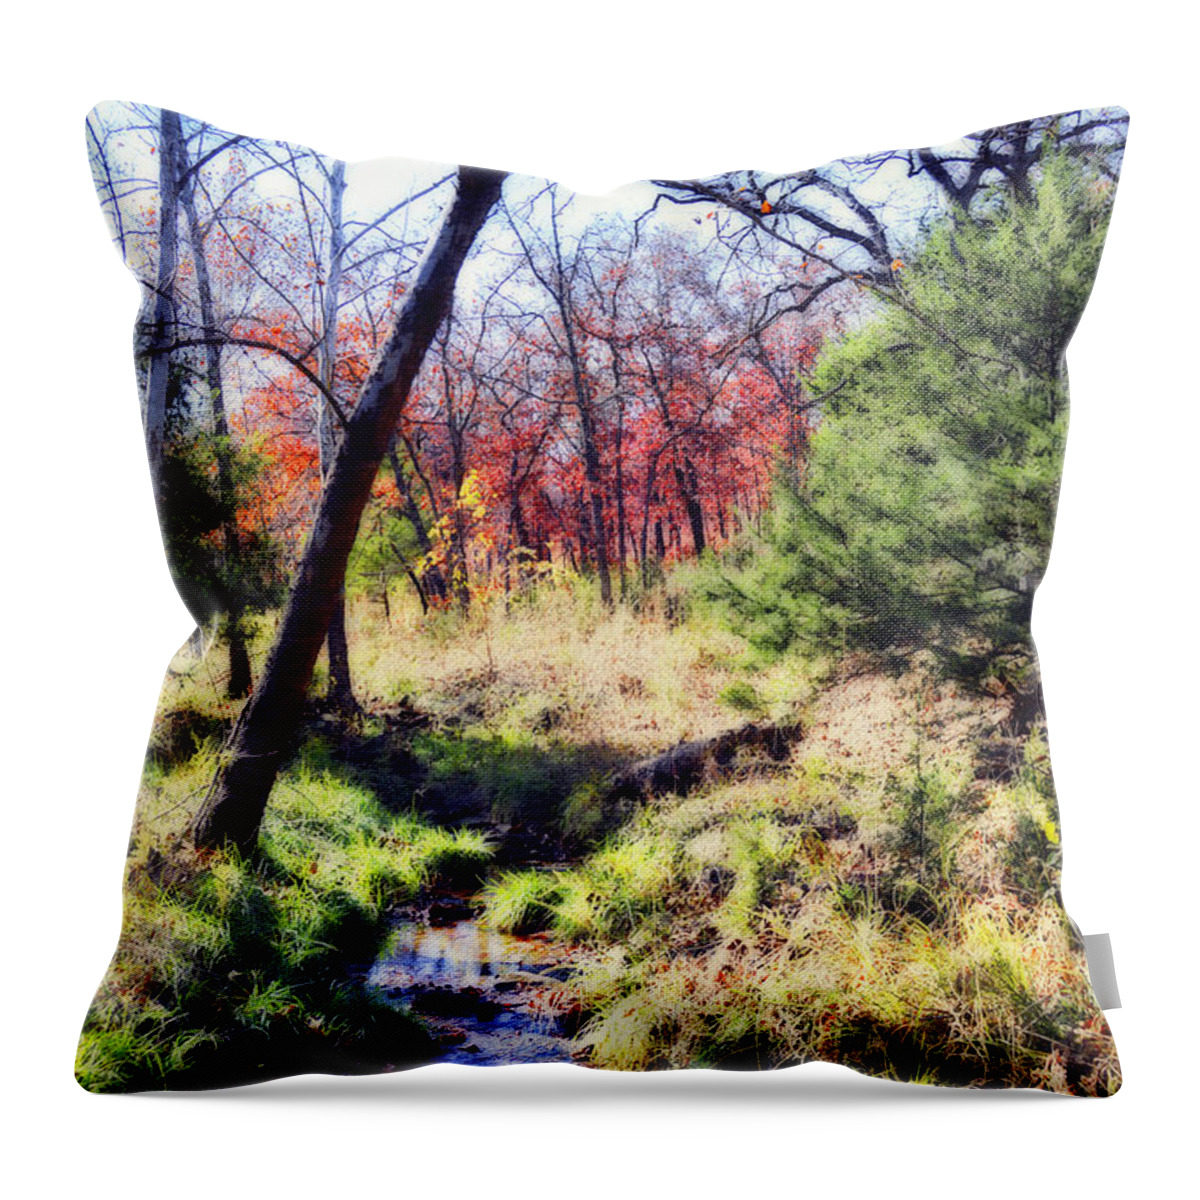 Nature Throw Pillow featuring the photograph Autumn Stream by Ann Powell